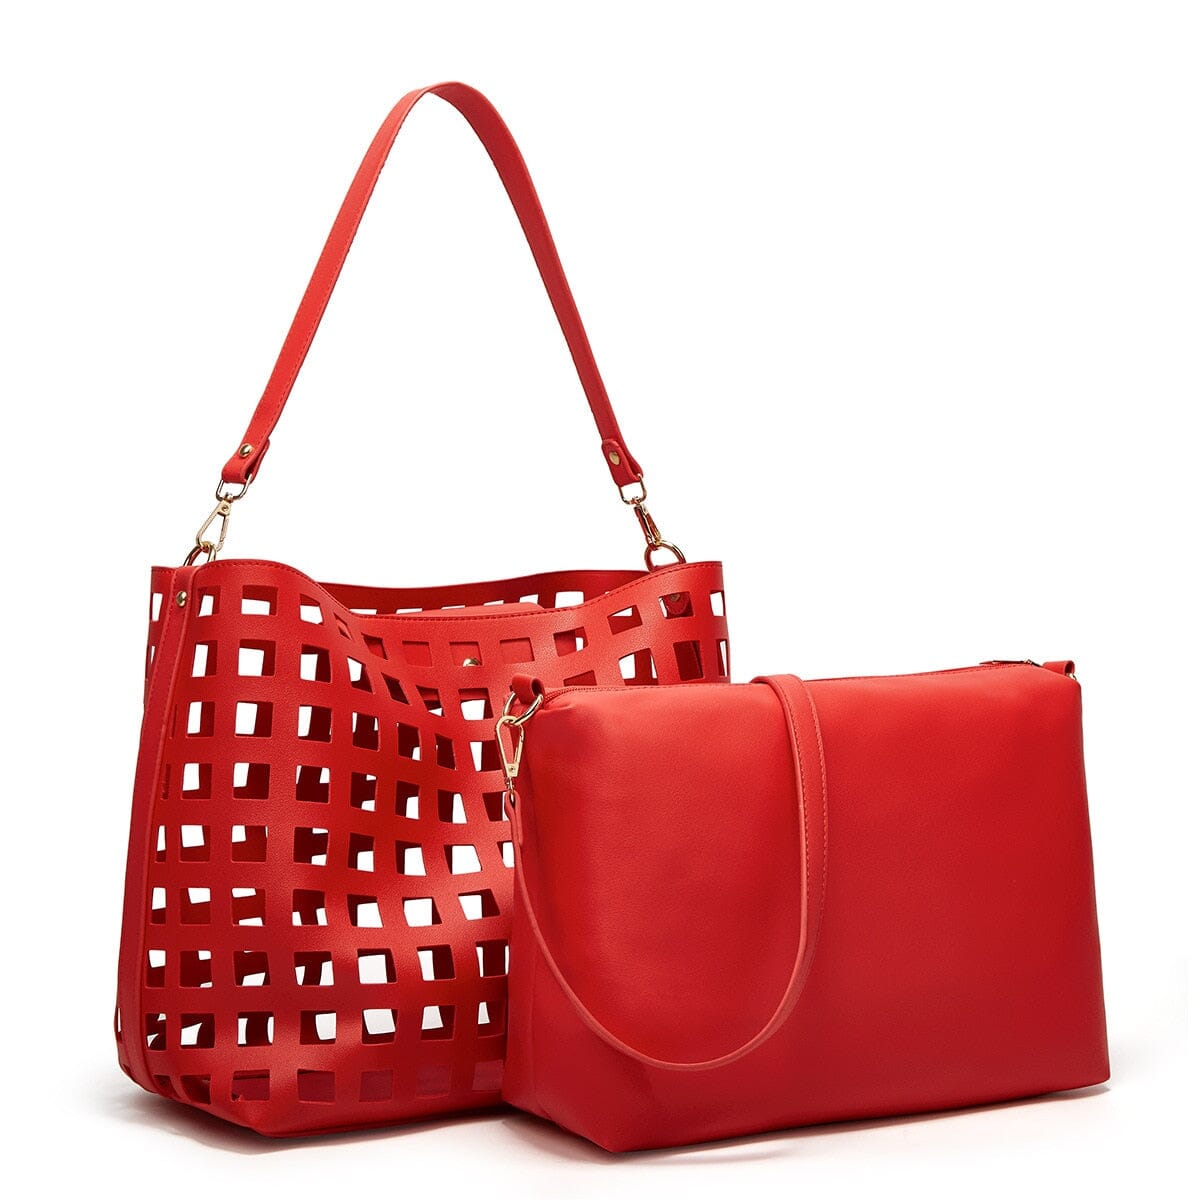 Open Weave Leather Bag The Store Bags Red 